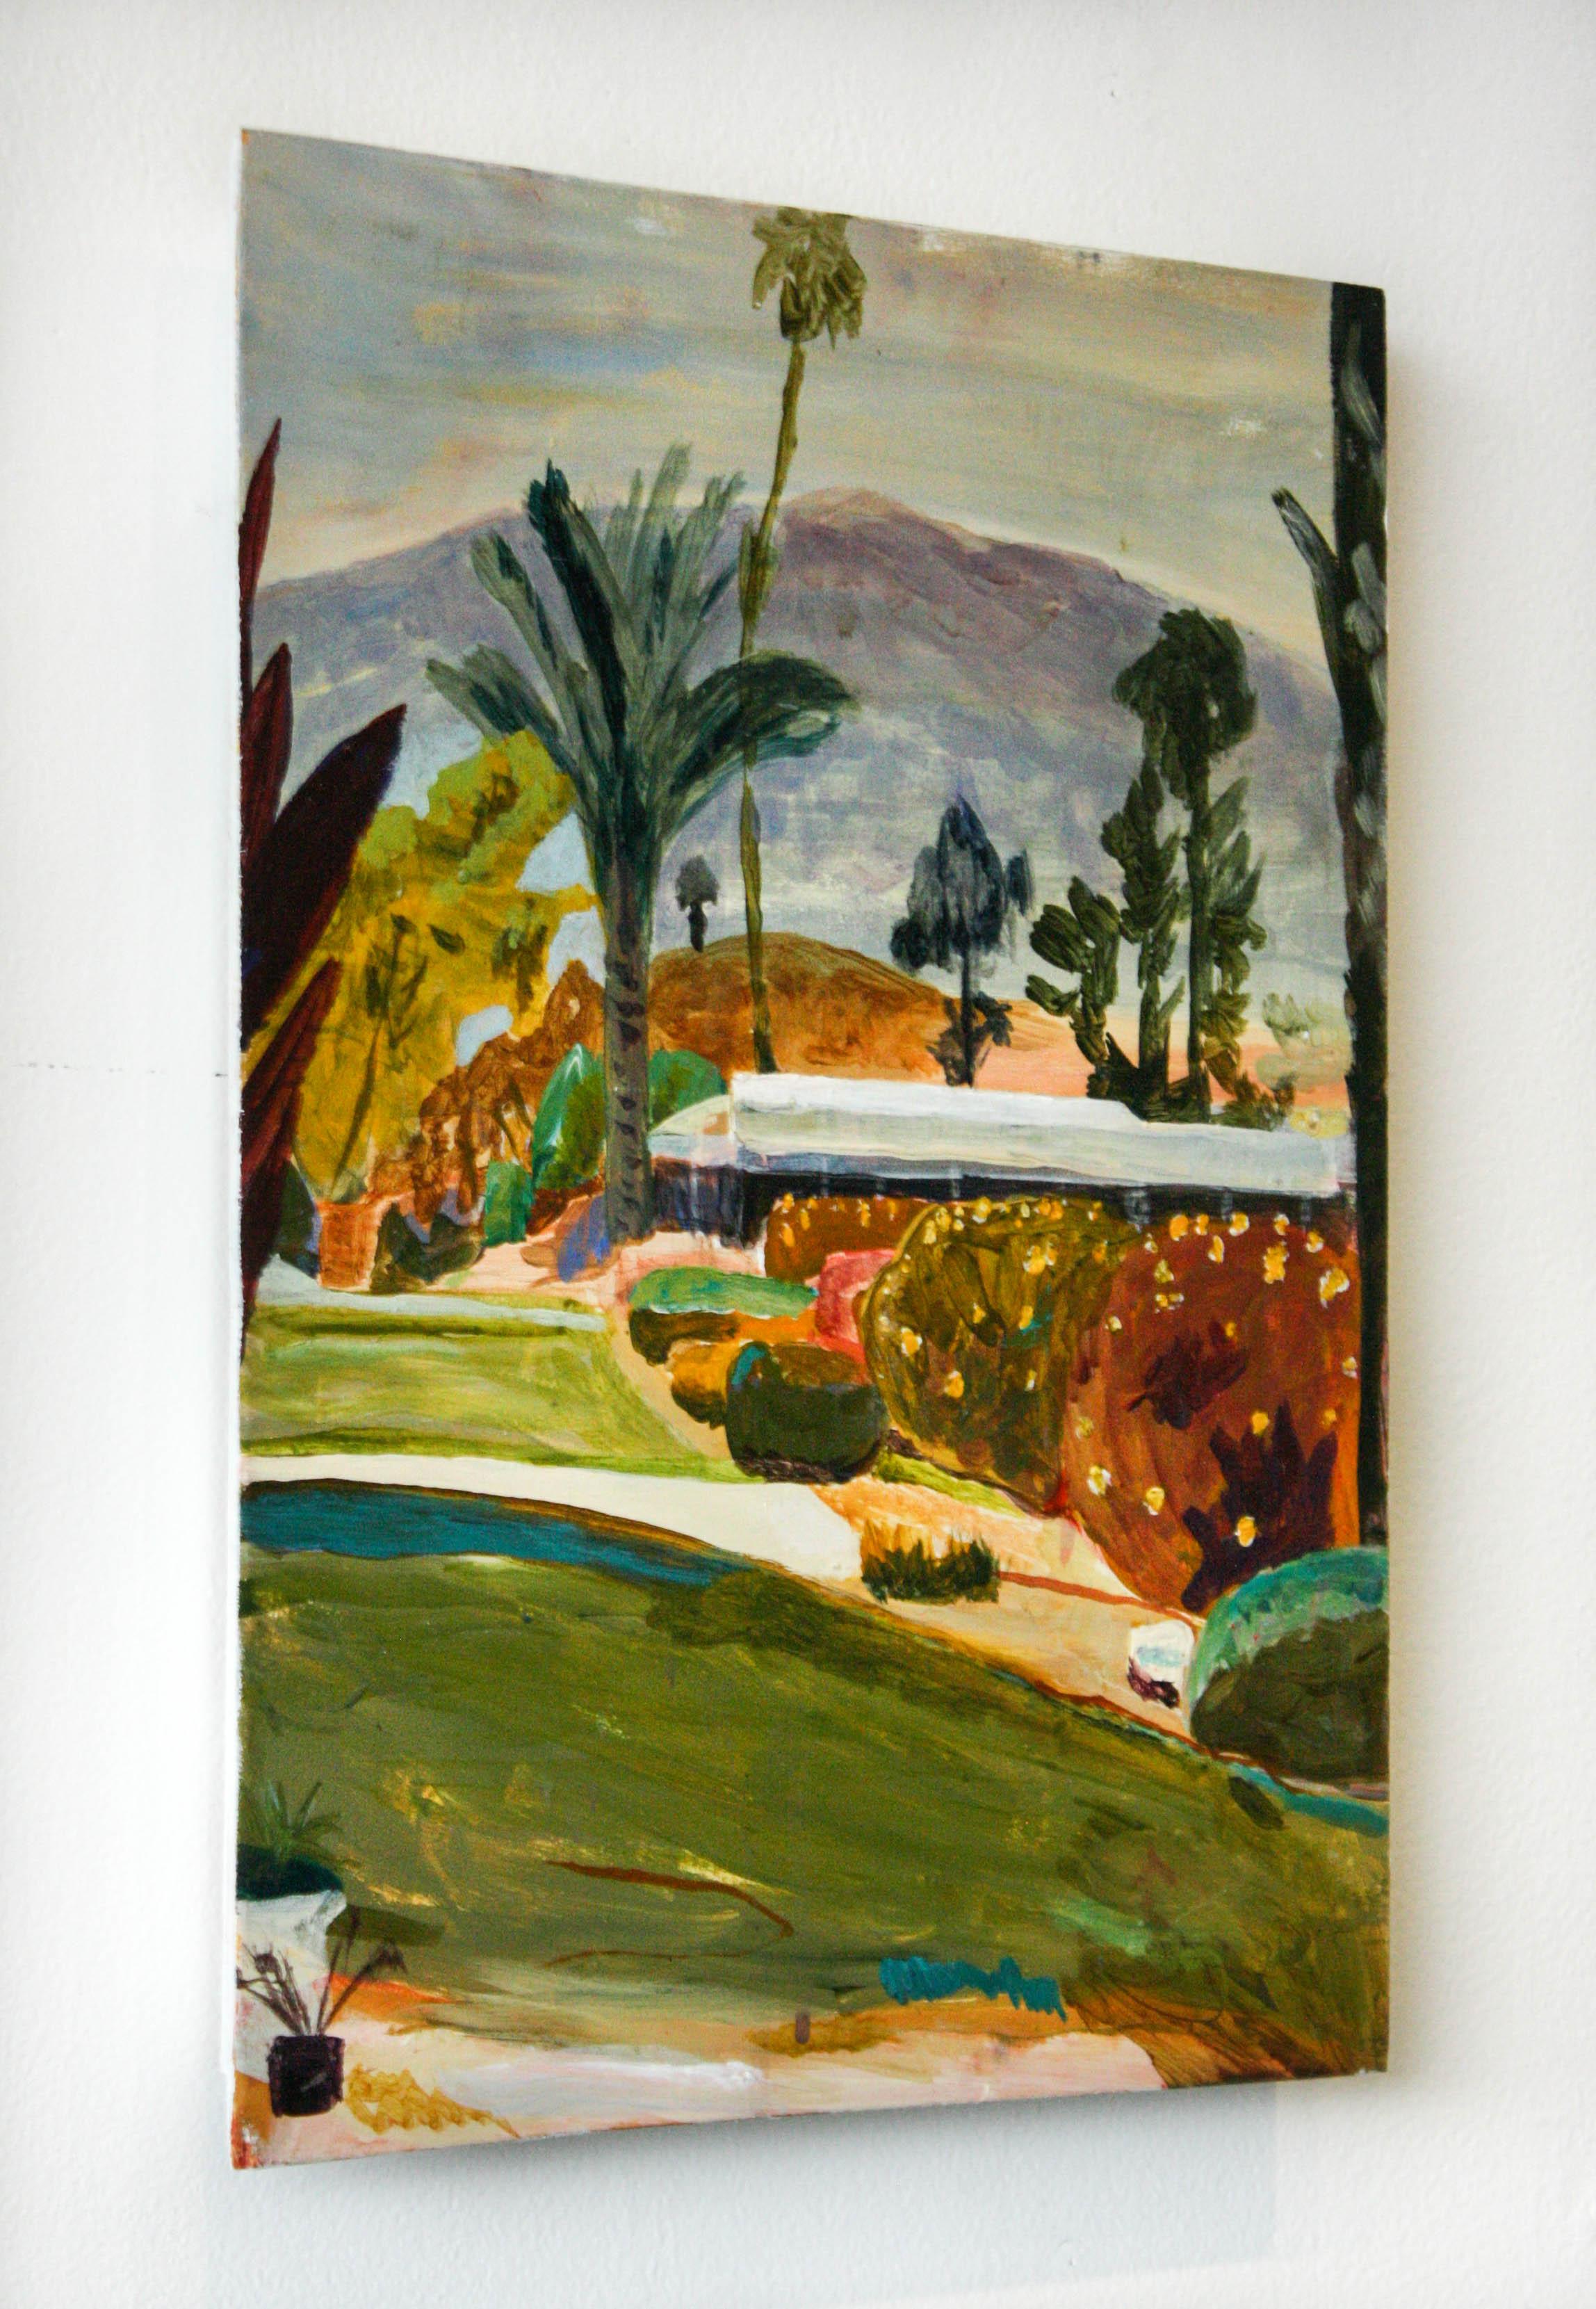 Rancho Mirage- Acrylic Paint, Wood Panel, Landscape, Green, Blue, Nature, Yellow - Painting by John Paul Kesling